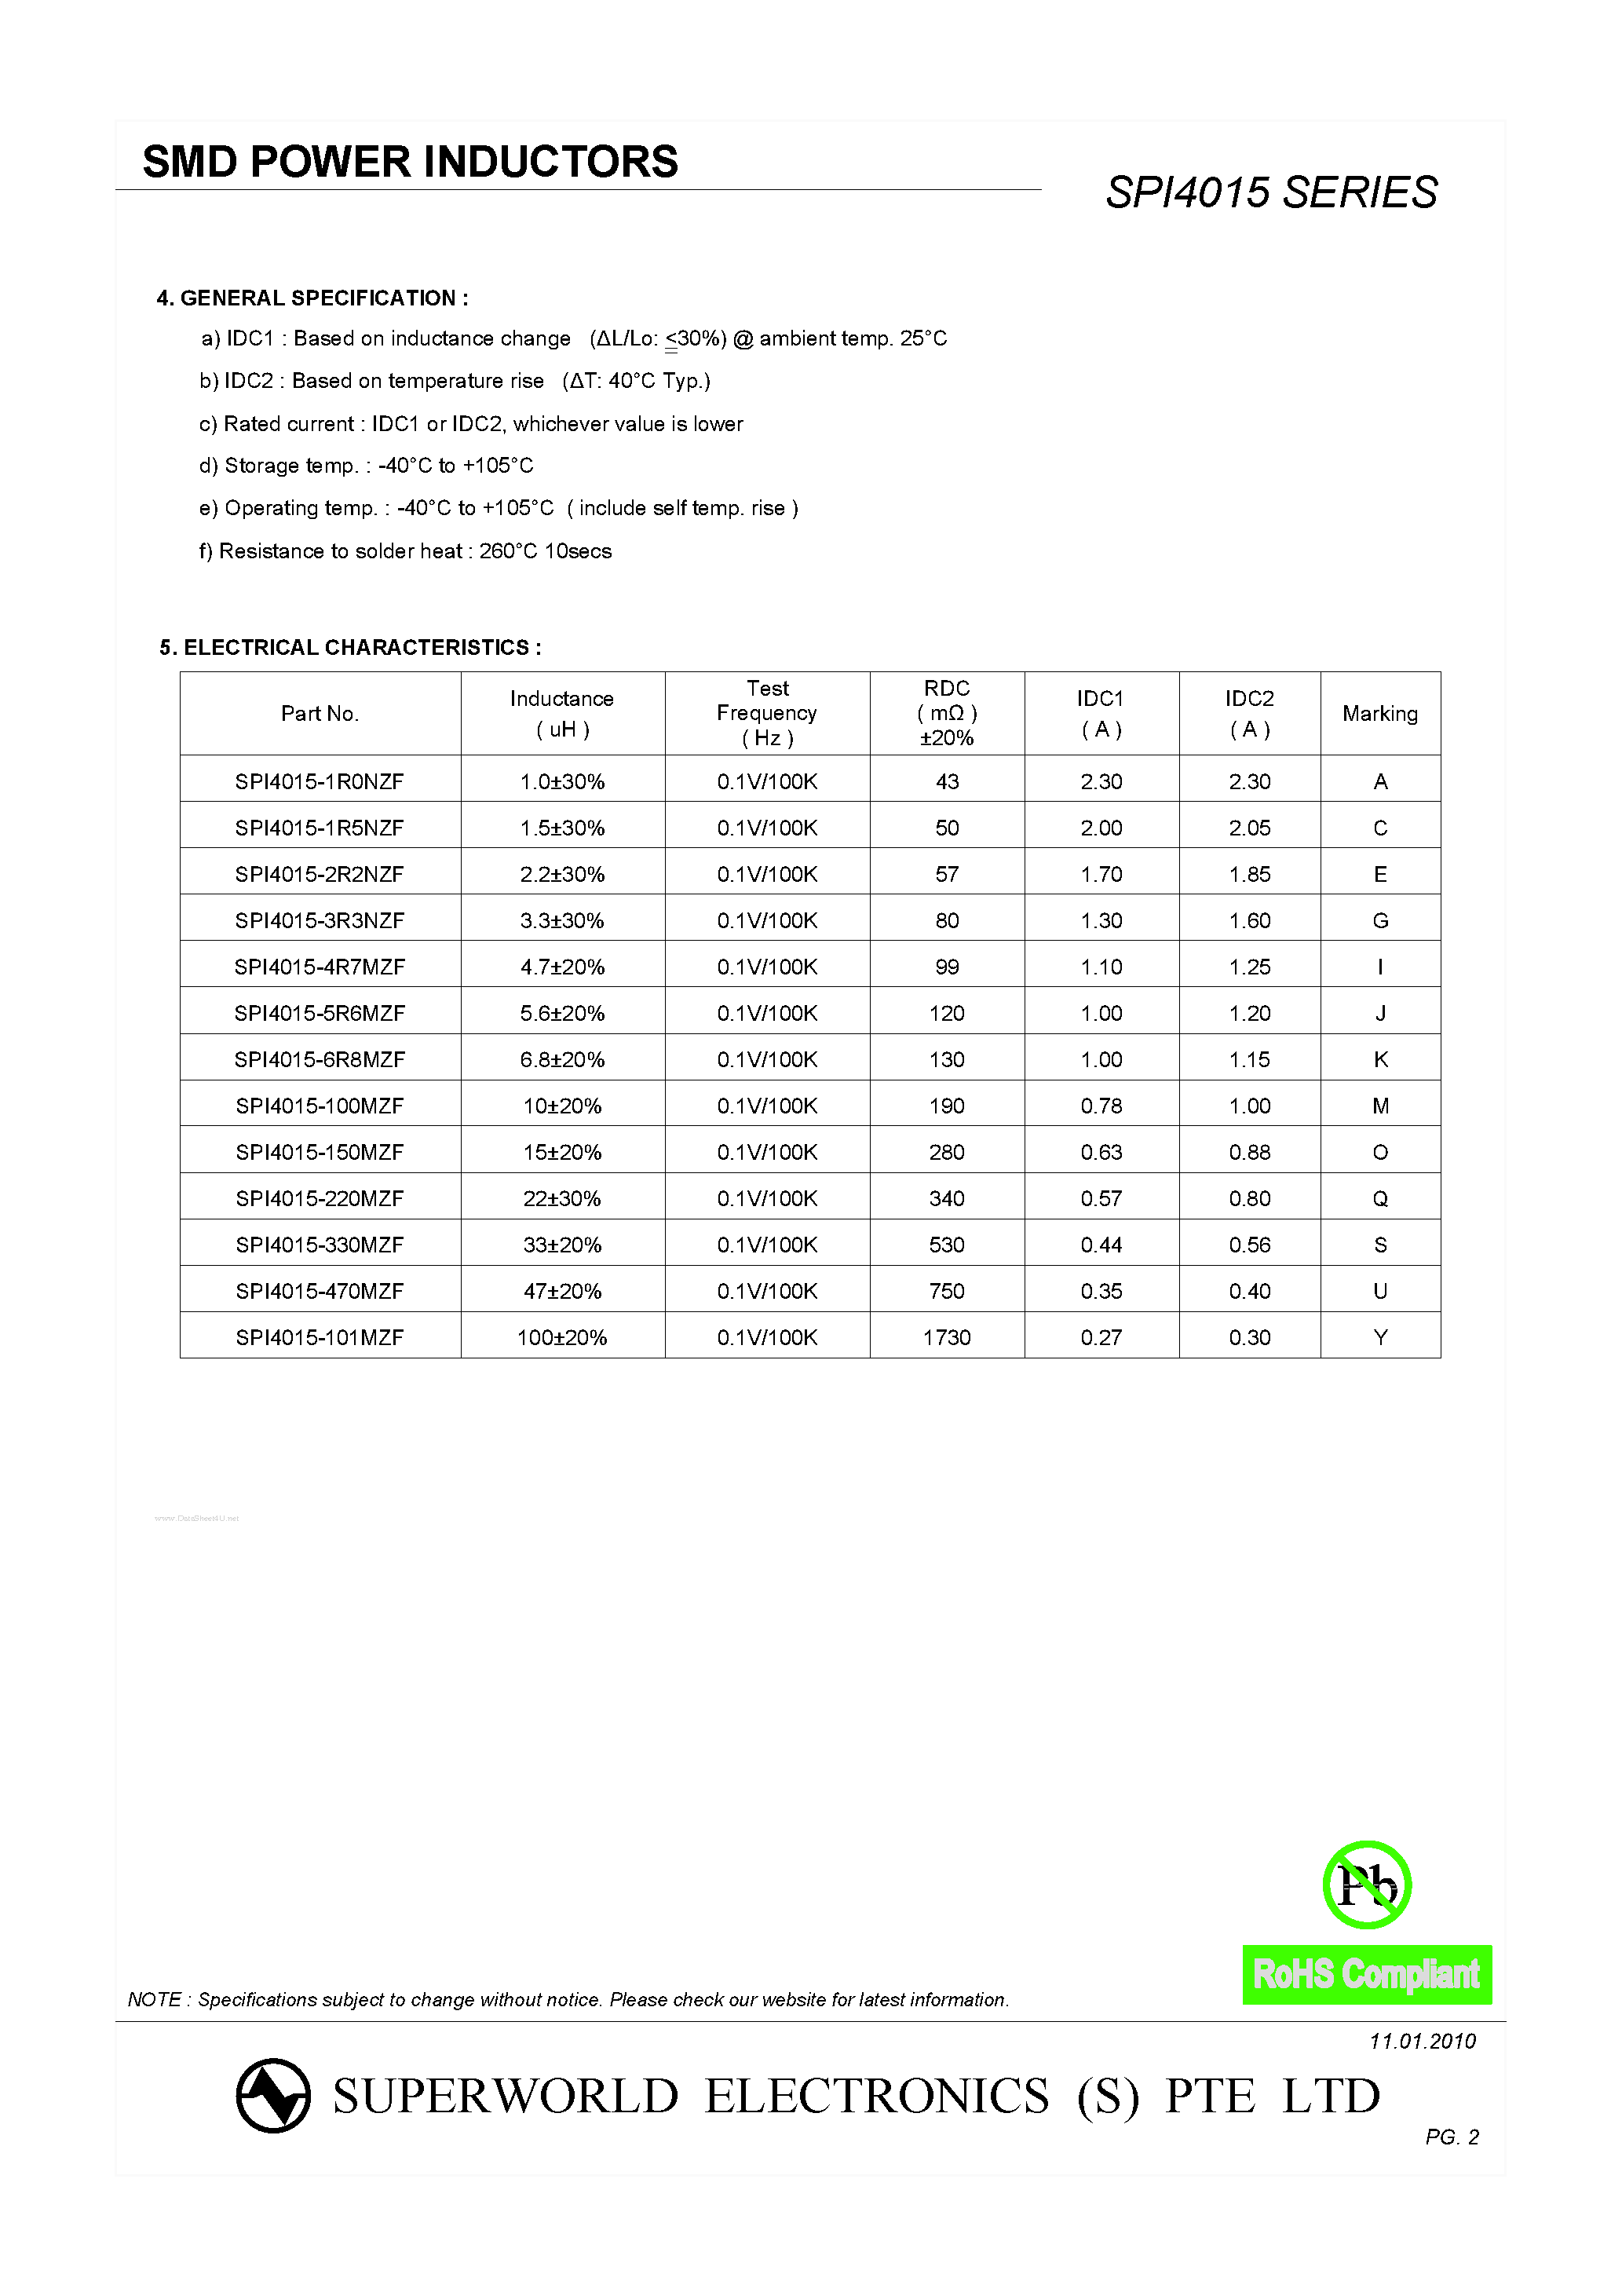 Datasheet SPI4015 - SMD POWER INDUCTORS page 2